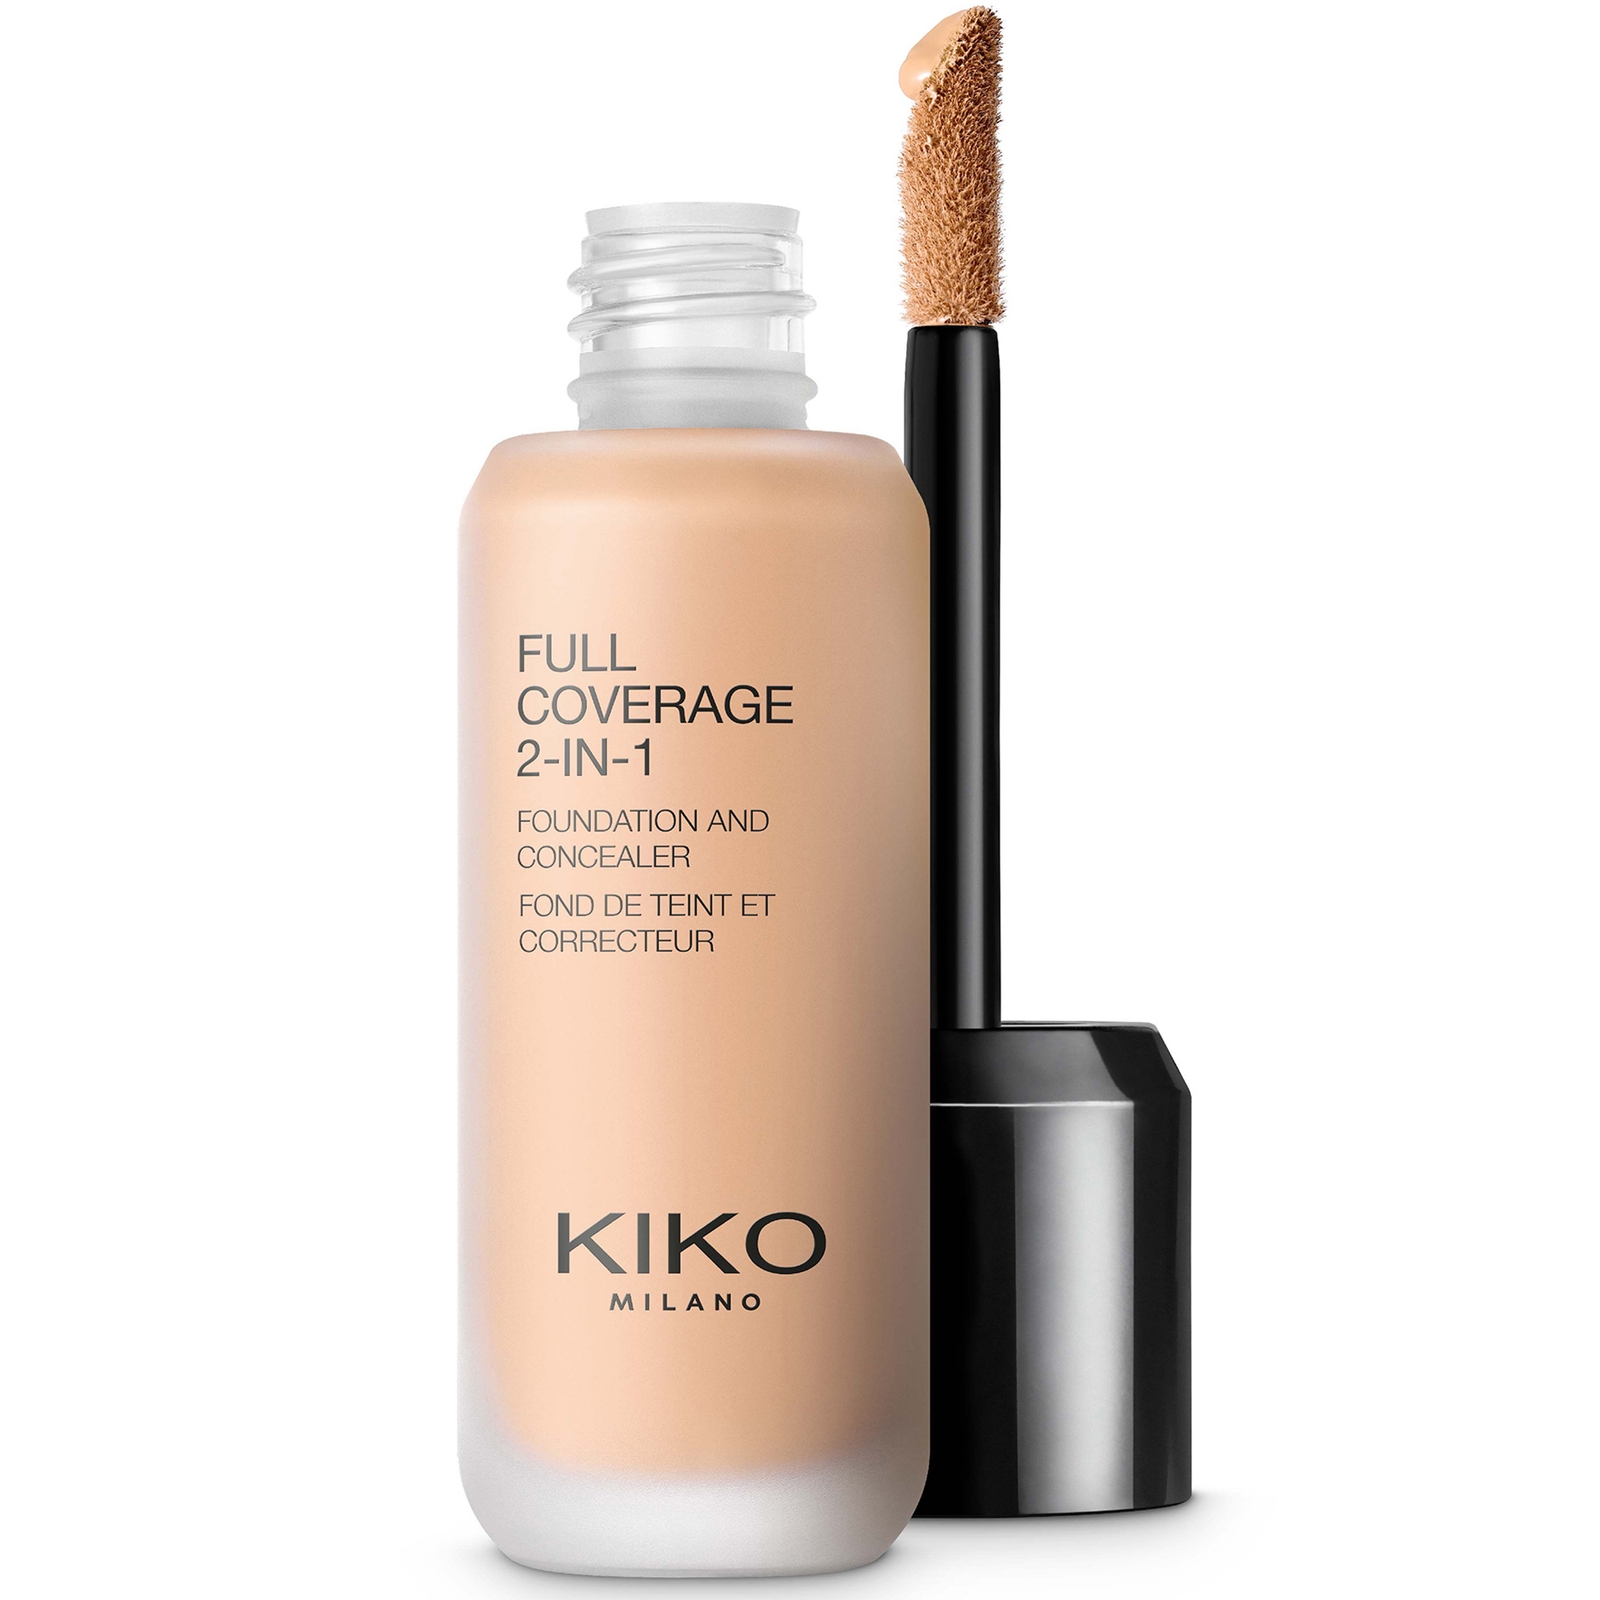 Image of KIKO Milano Full Coverage 2-in-1 Foundation and Concealer 25ml (Various Shades) - 30 Warm Rose